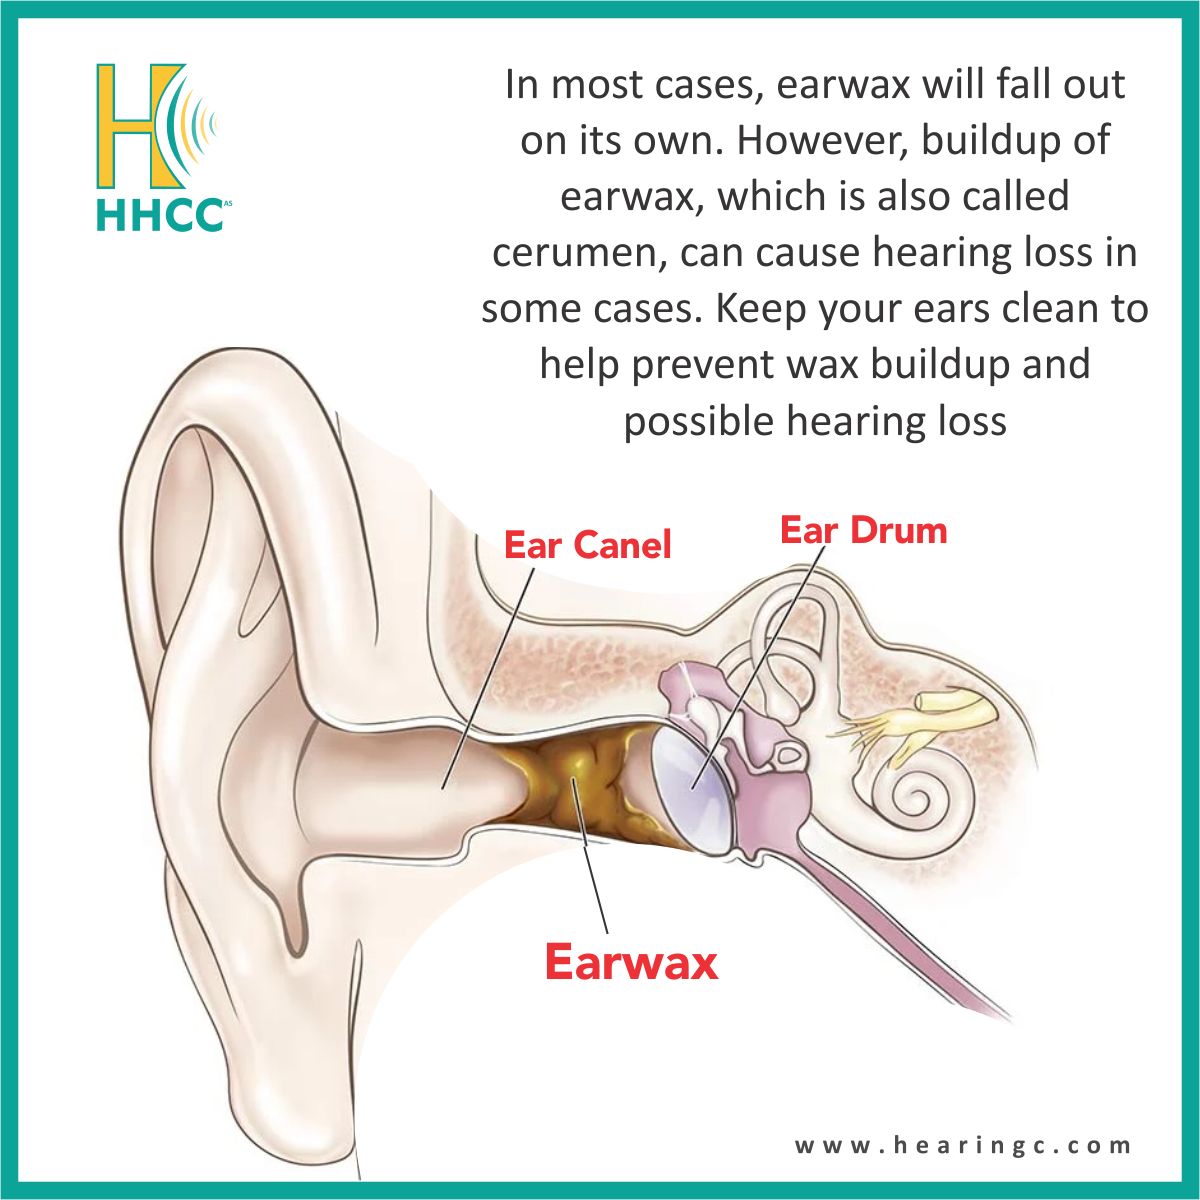 Caring for your ears is vital! Excessive earwax buildup can lead to hearing loss. Learn how to maintain healthy hearing. #EarHealth #HearingLossPrevention #EarCareTips #HHCCAS #ORS #hearingc #orevarehab